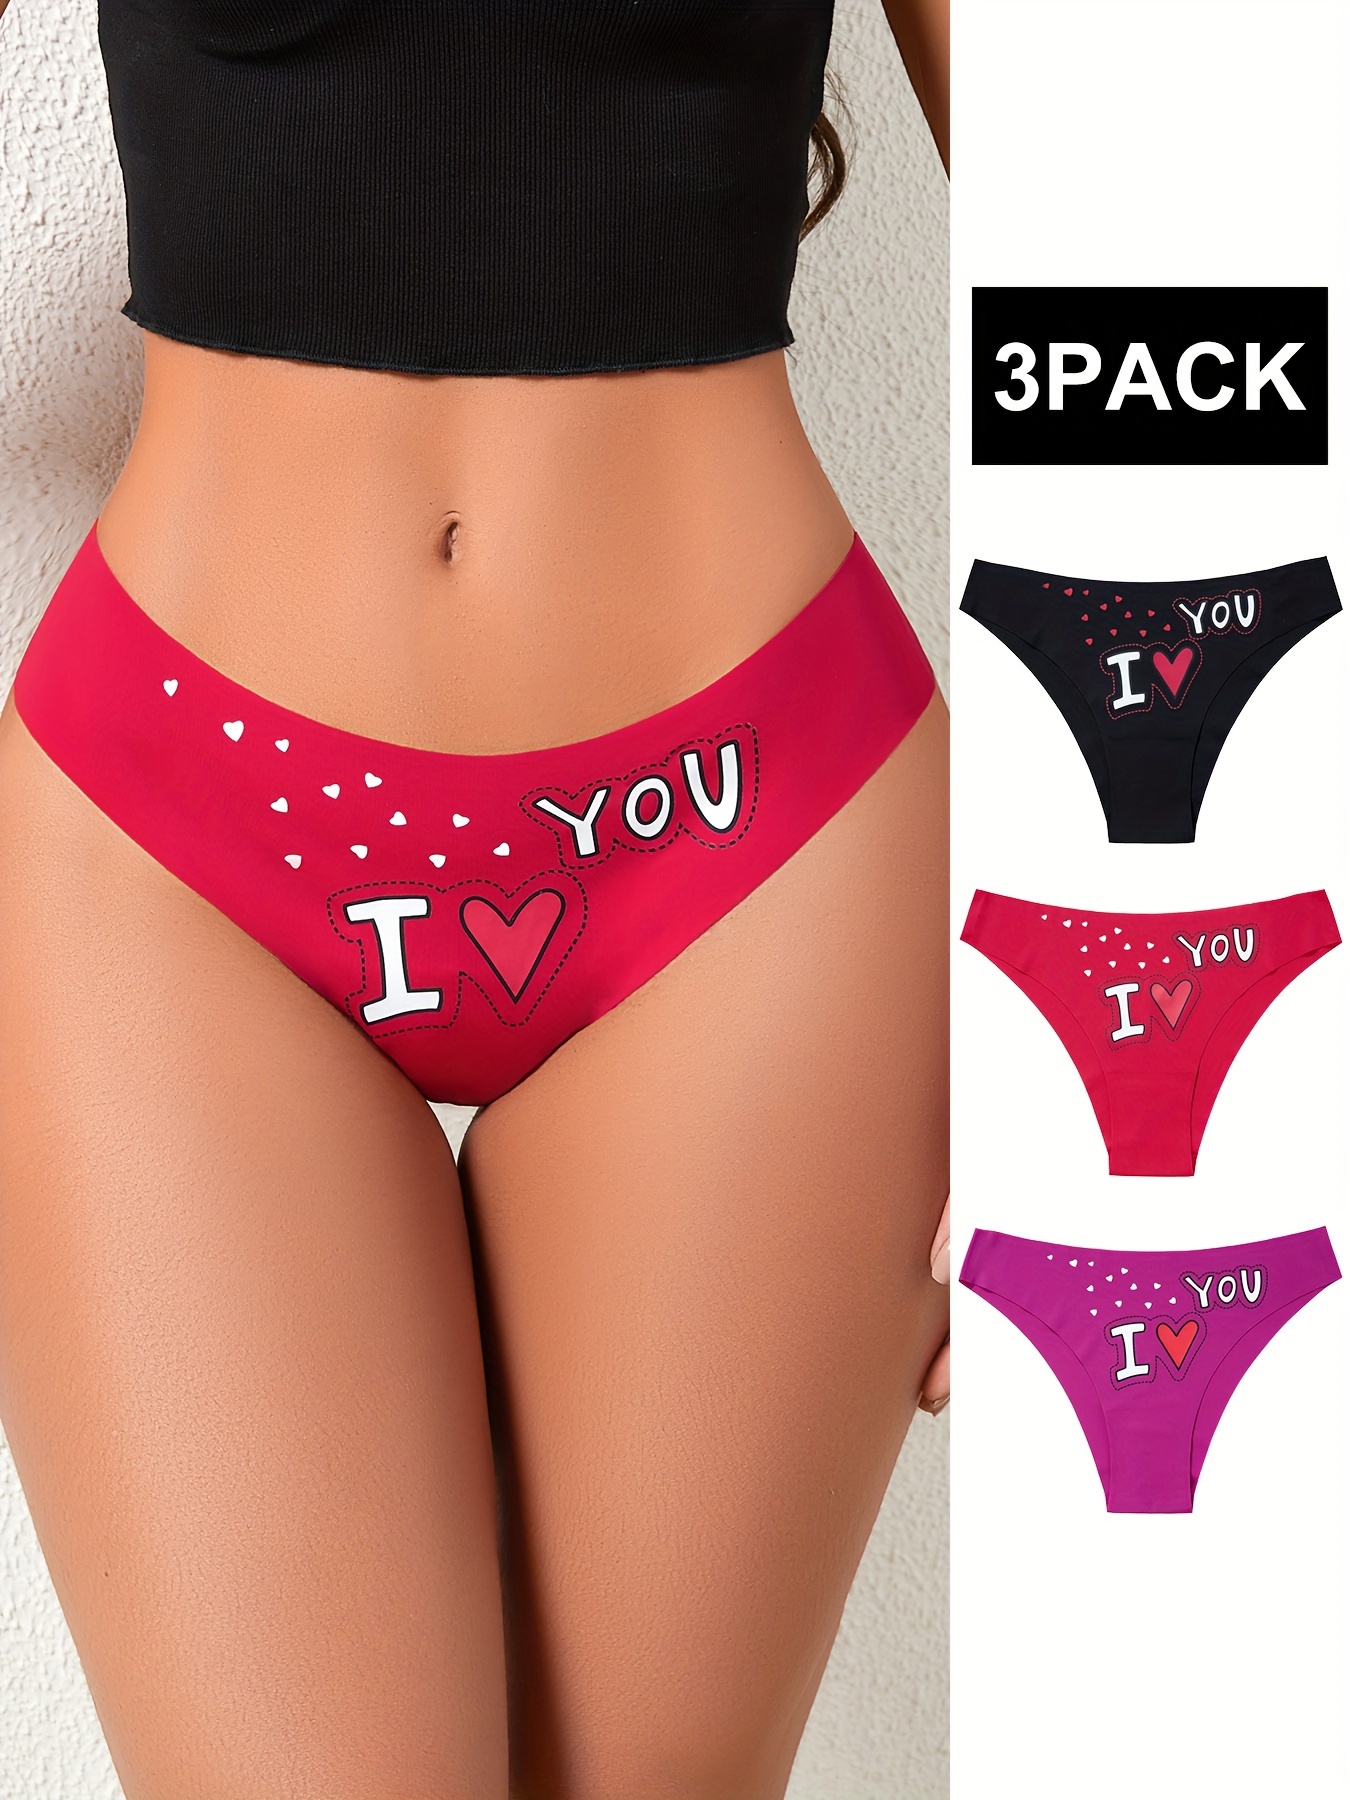 Valentine's Day Red Bow Love Heart Women's Low Waist Breathable Cotton  Underwear Soft Panties Stretch Briefs at  Women's Clothing store